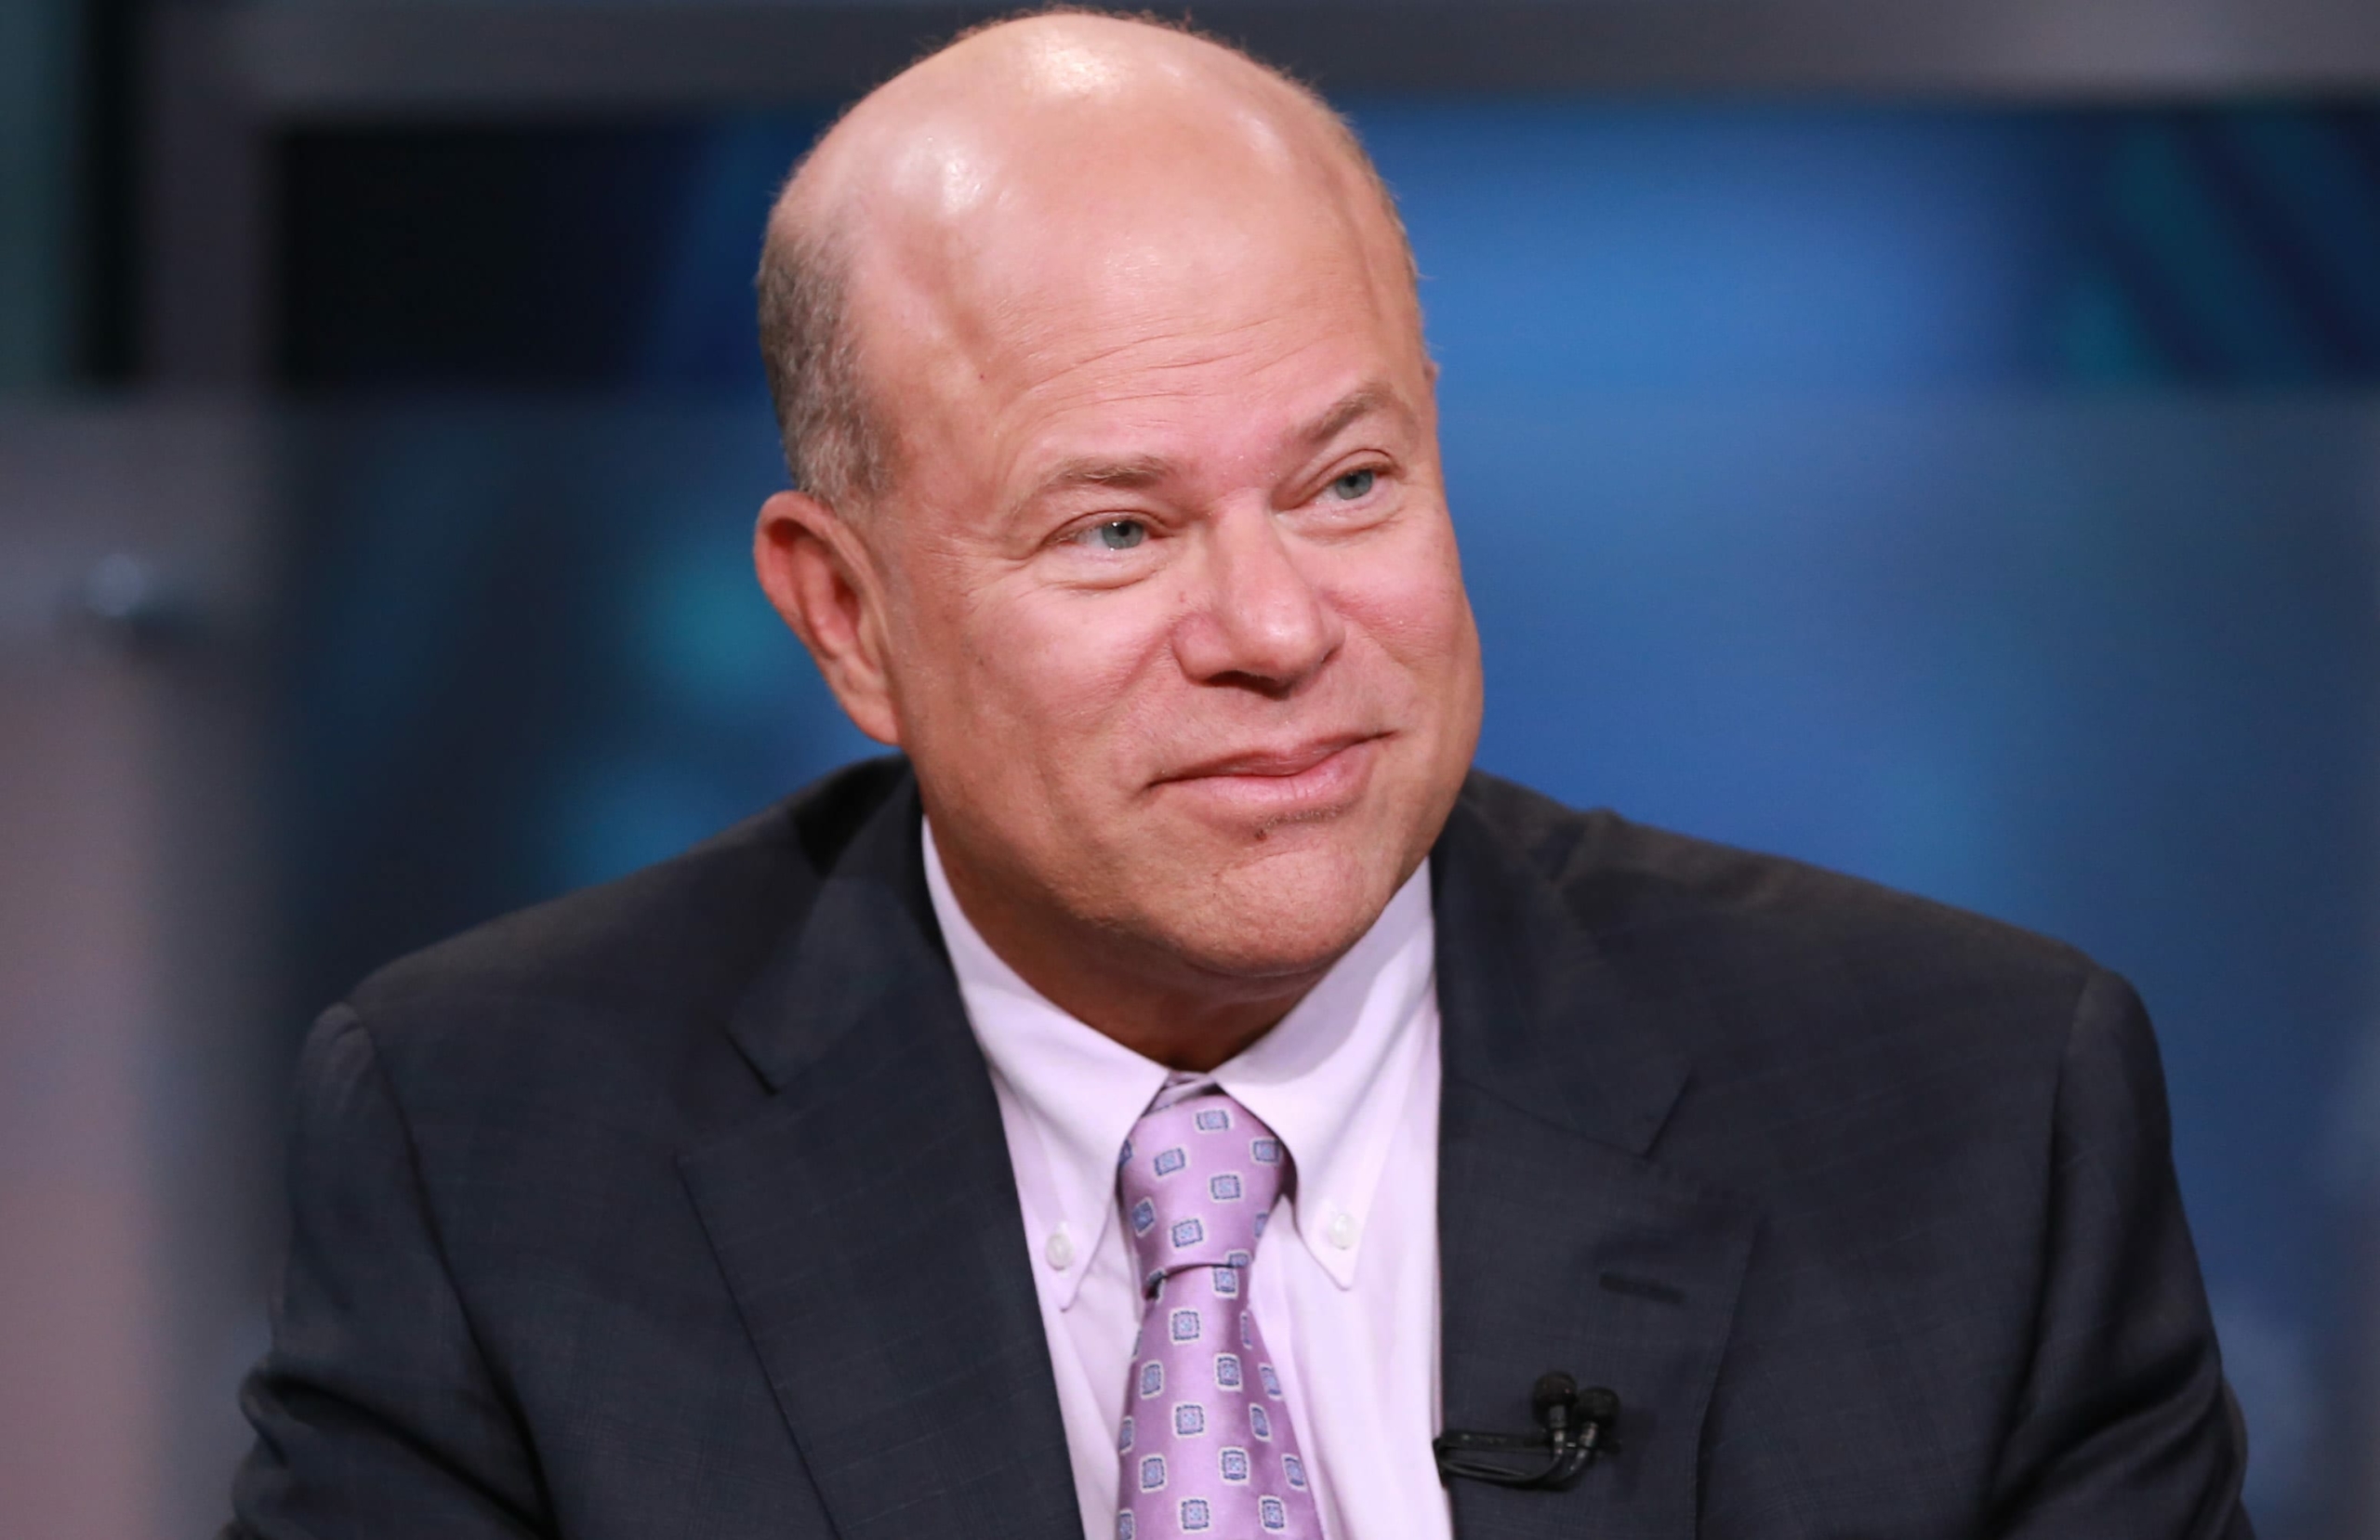 Interesting facts about David Tepper
source https://www.cnbc.com/2021/10/22/david-tepper-doesnt-think-stocks-are-a-great-investment-here-but-says-it-all-depends-on-rates.html